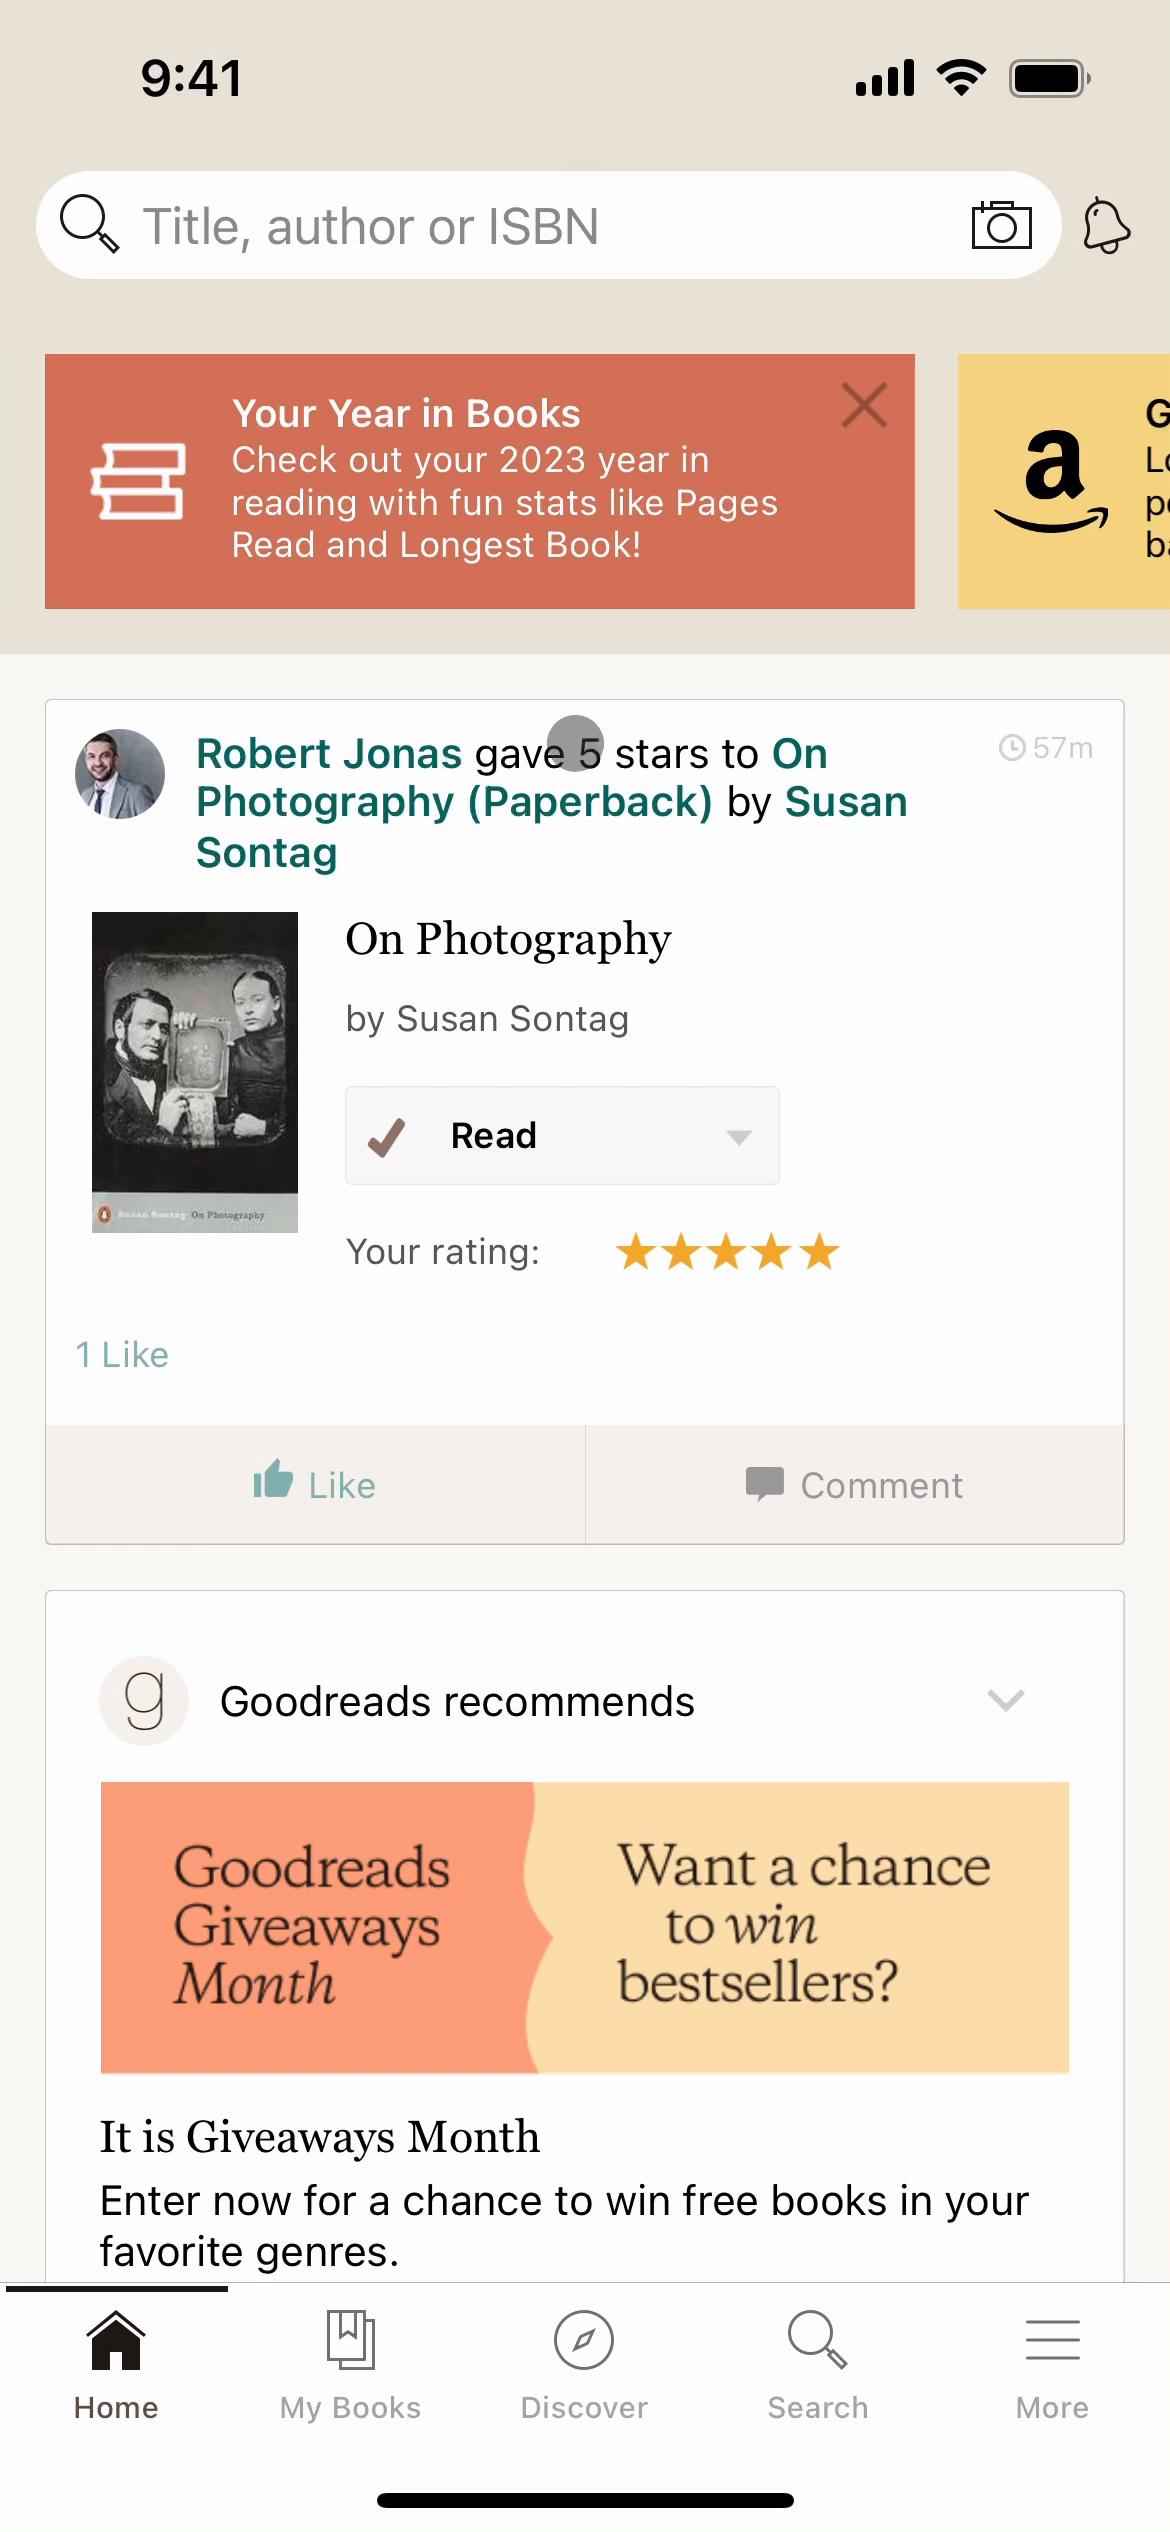 Commenting on Goodreads video screenshot